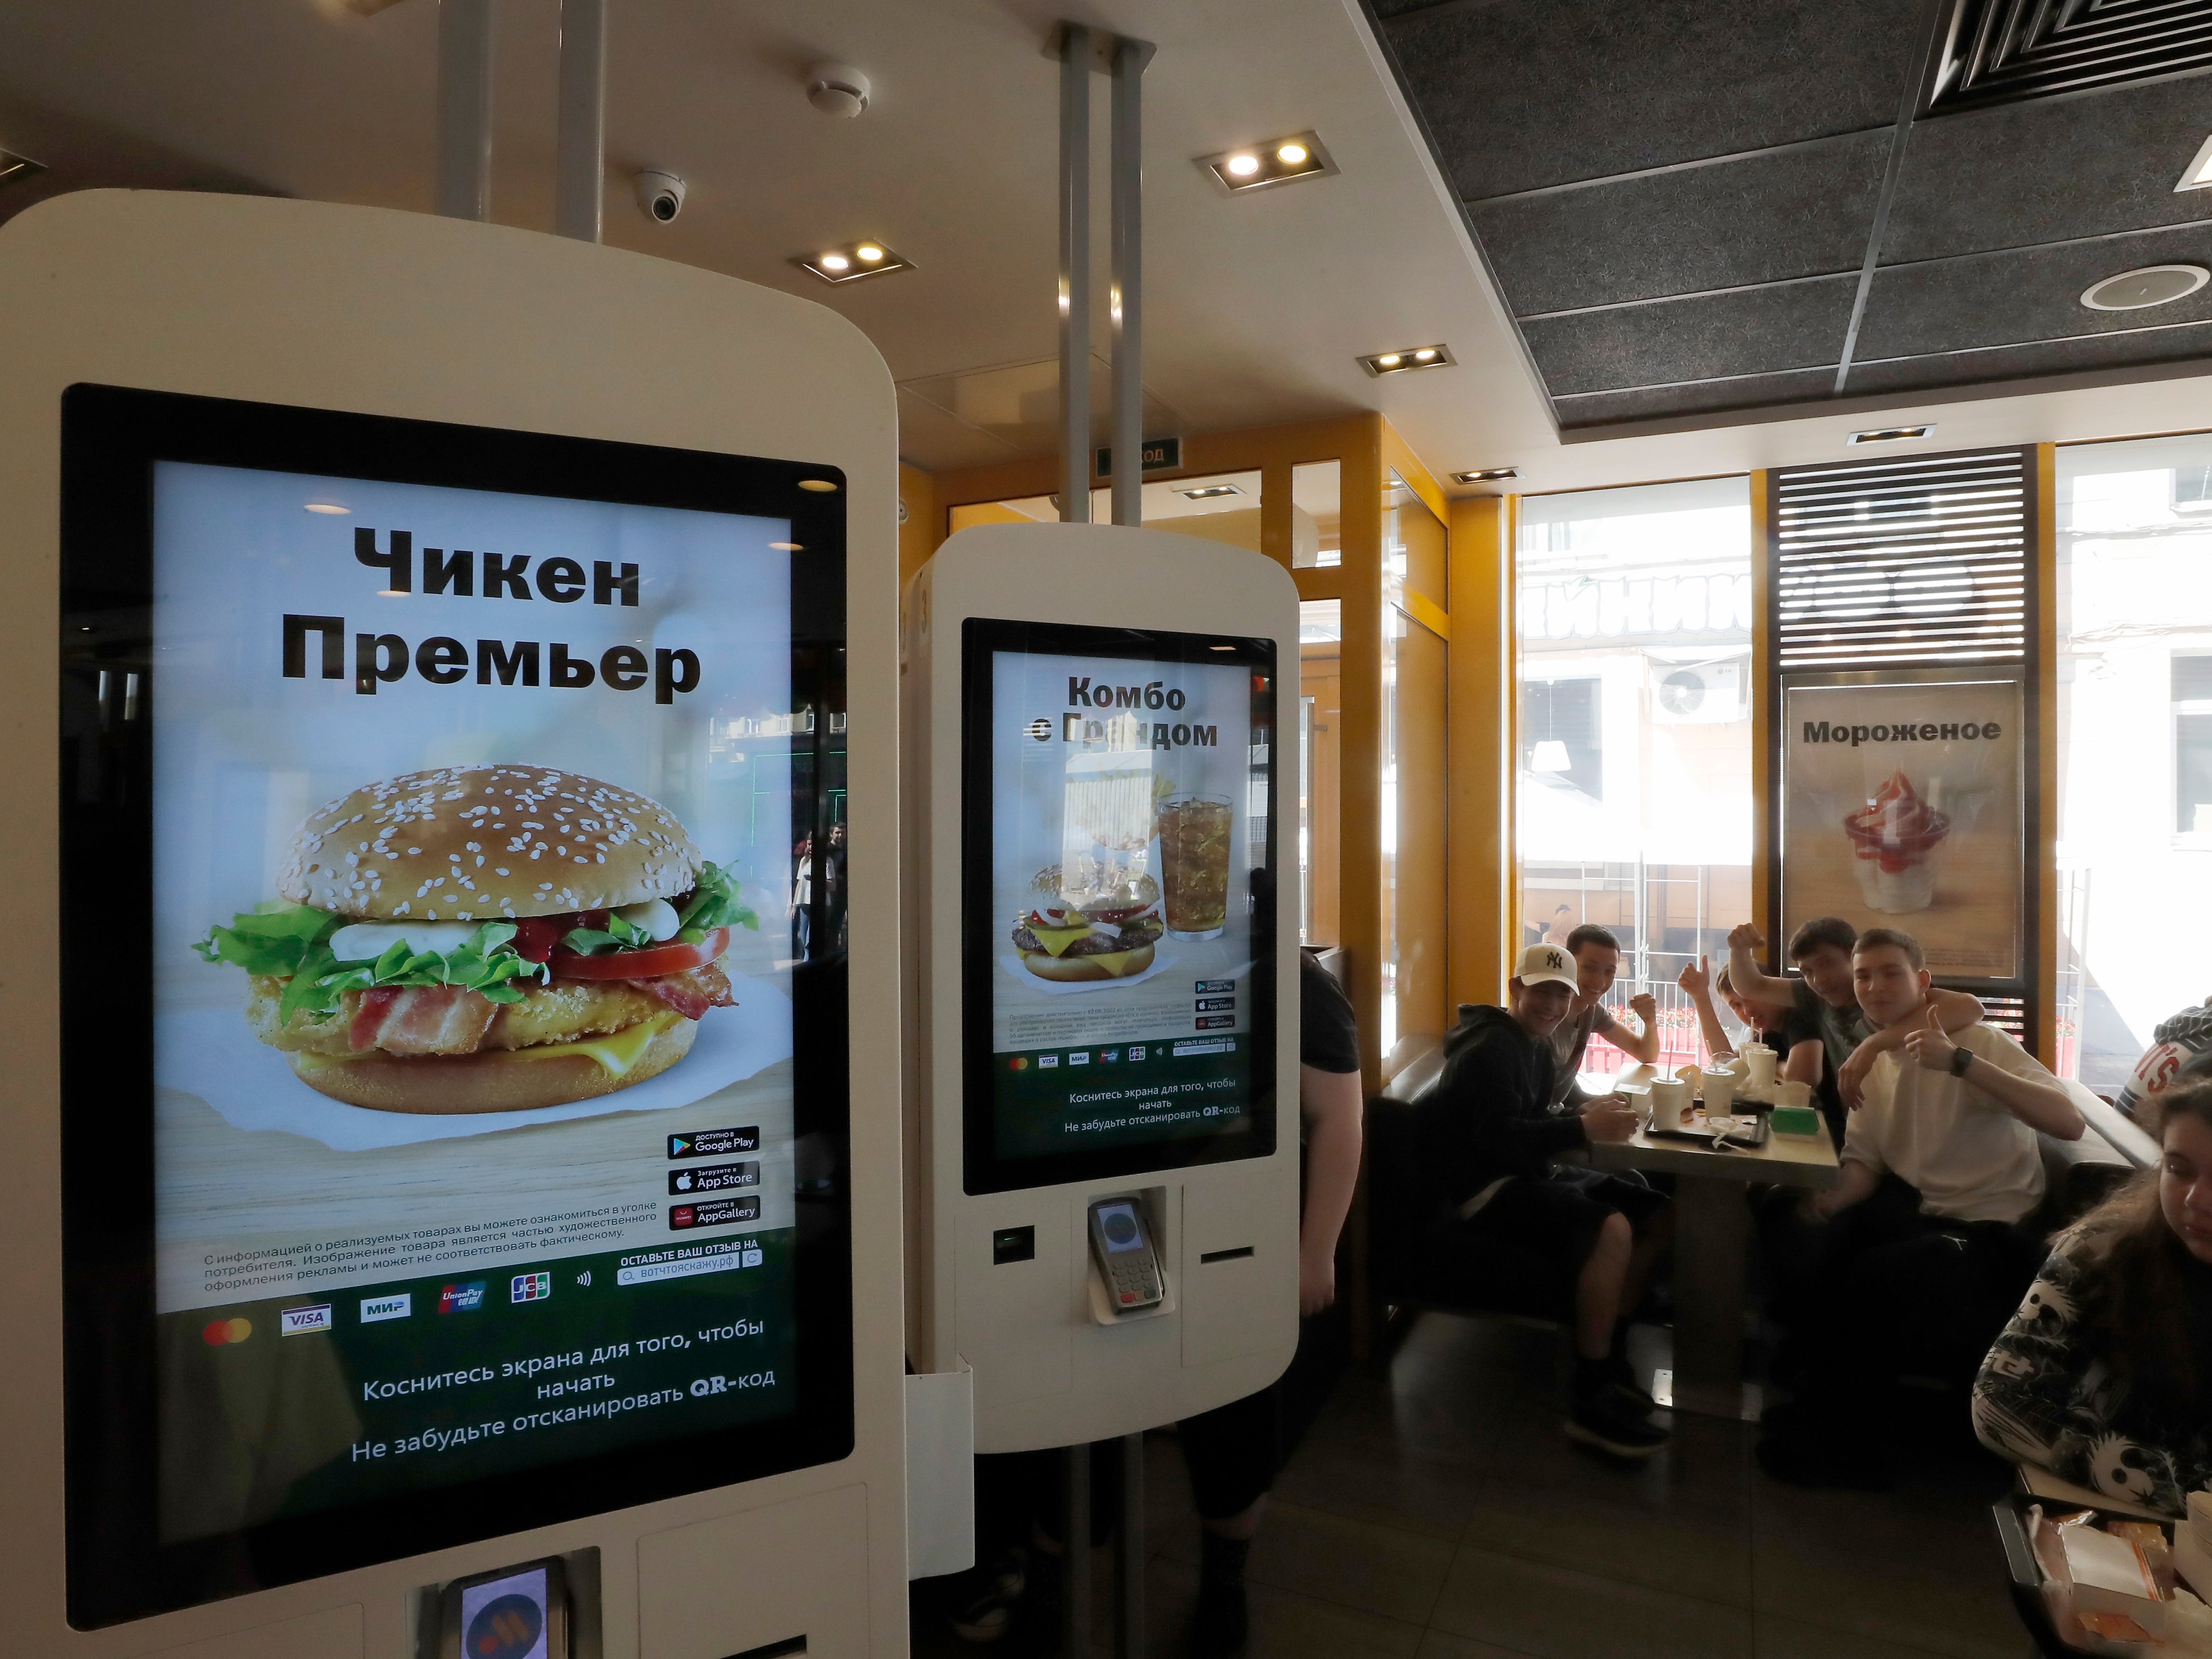 The McDonald’s replacement opened its first 15 restaurants in Russia last month